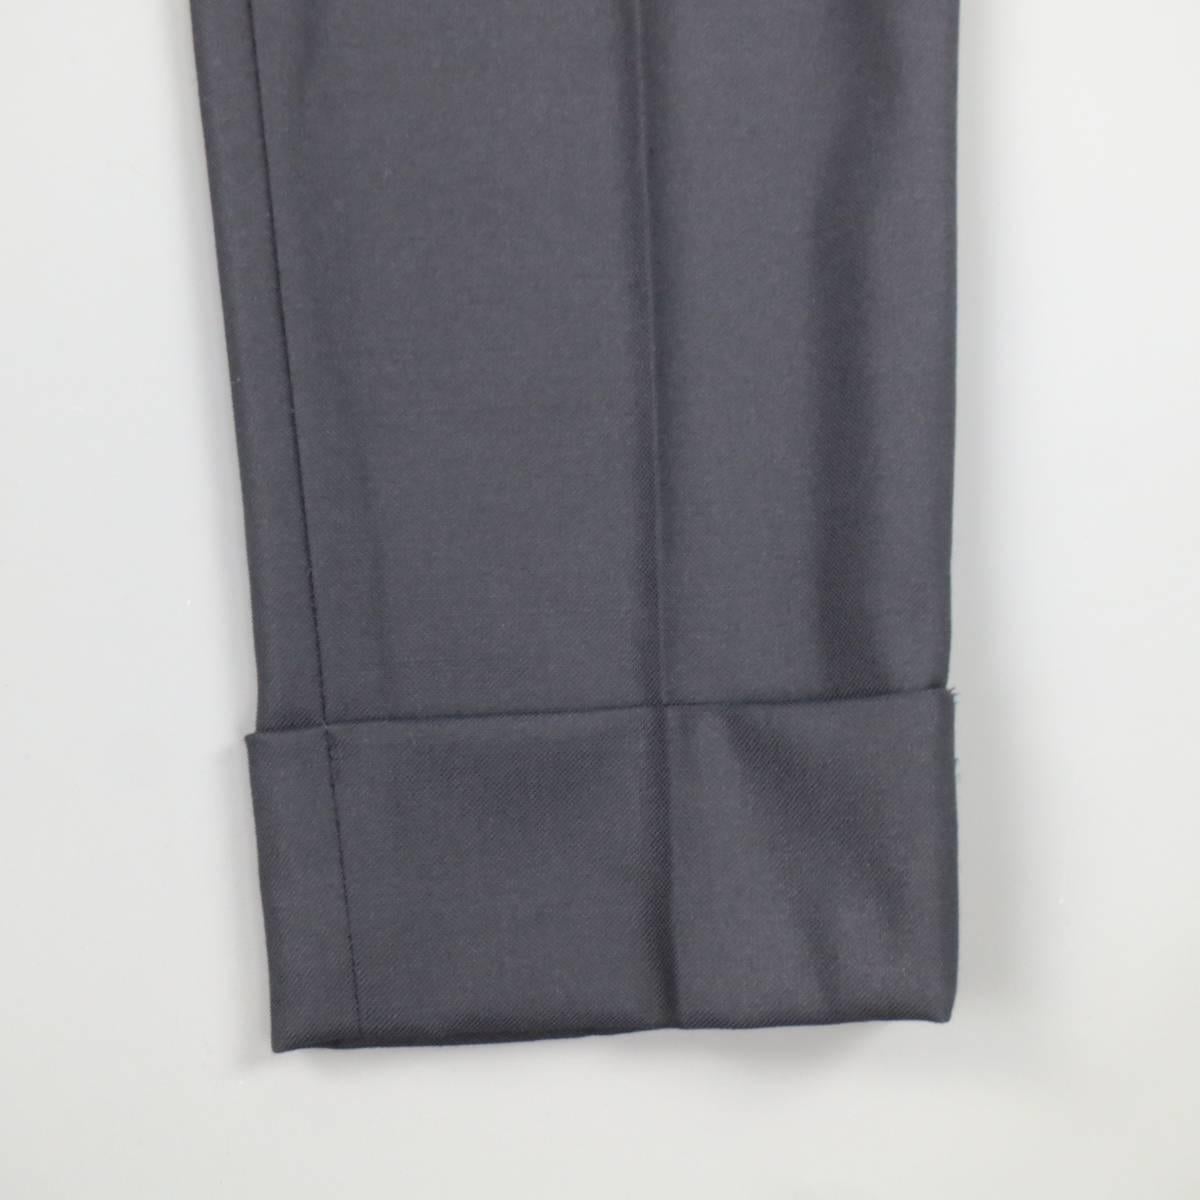 THE ROW navy blue virgin wool dress pants feature a tweed texture size zipper closure with hook and eye. side slit pockets, front pleats, and cuffed hems. Made in USA.
 
Excellent Pre-Owned Condition.
Marked: 0
 
Measurements:
 
Waist: 29 In.
Rise: